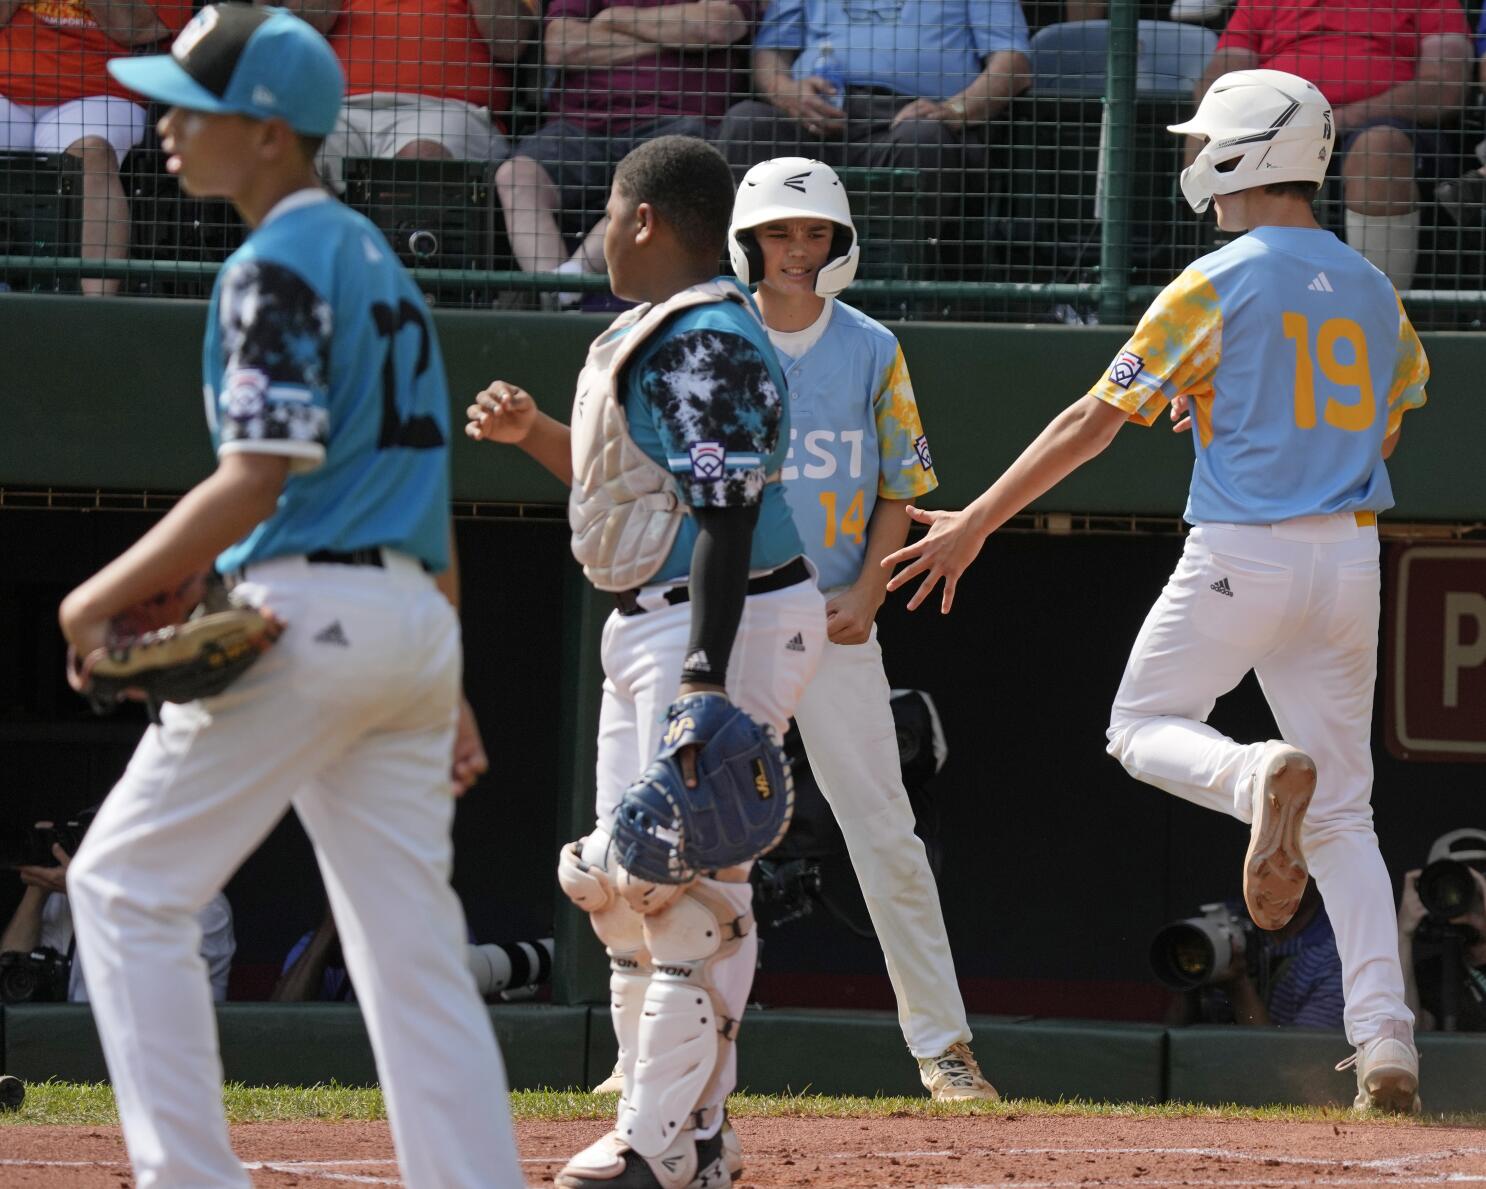 Little League World Series: California To Play Curacao In The